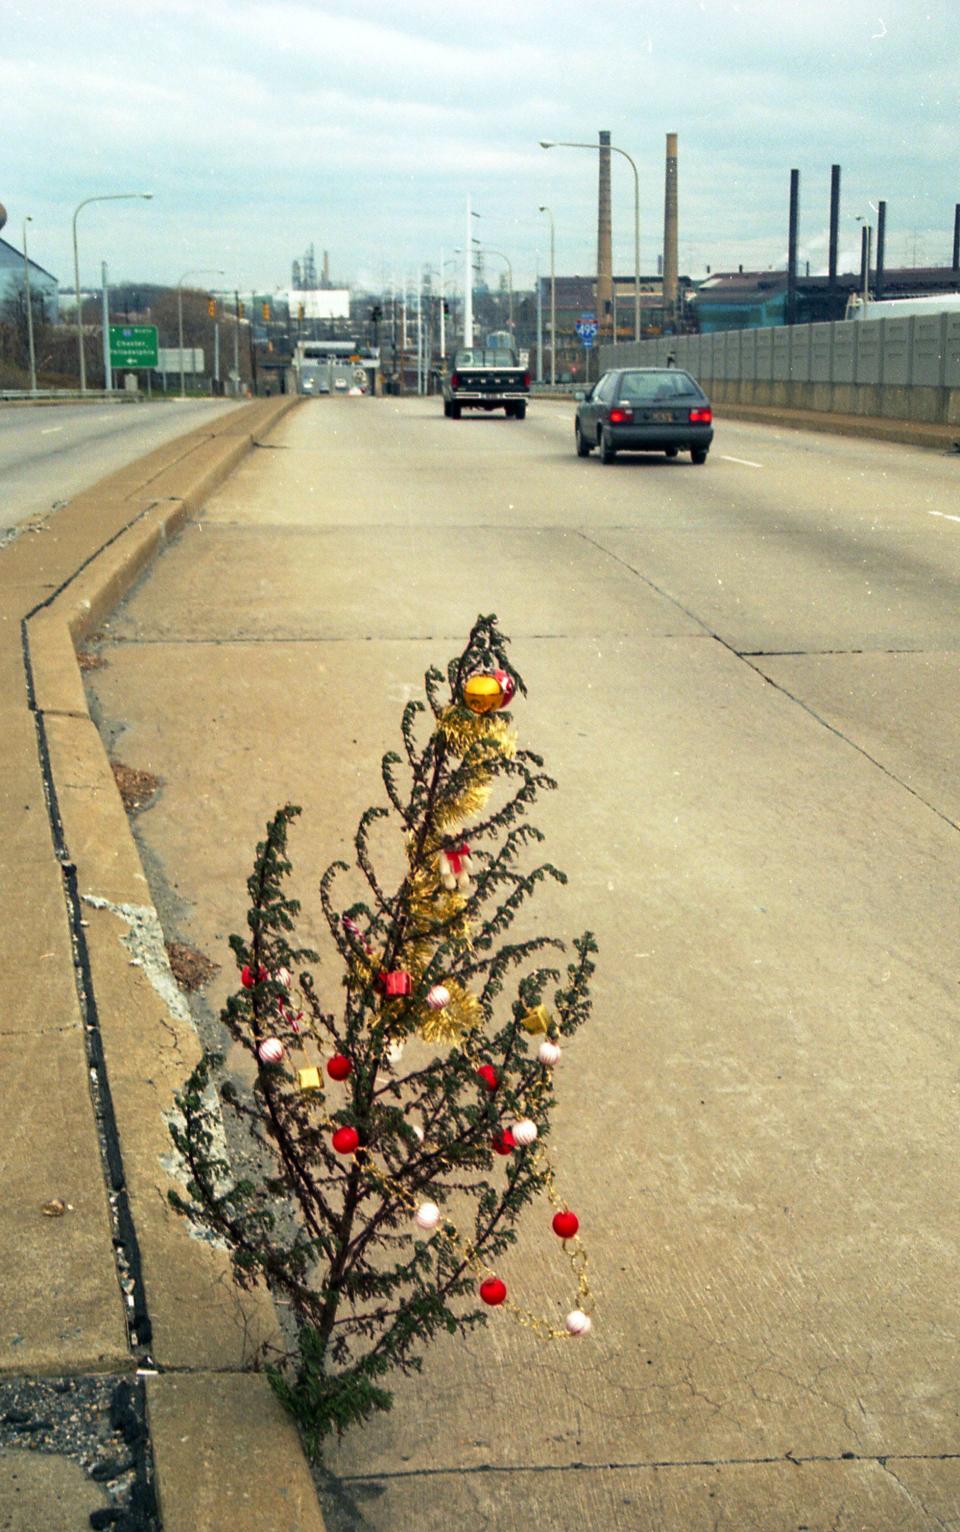 A photo of the original Christmas Weed that a News Journal photographer spied growing out of crack in Claymont near I-495. It appeared on the front page on Dec. 17, 1993.